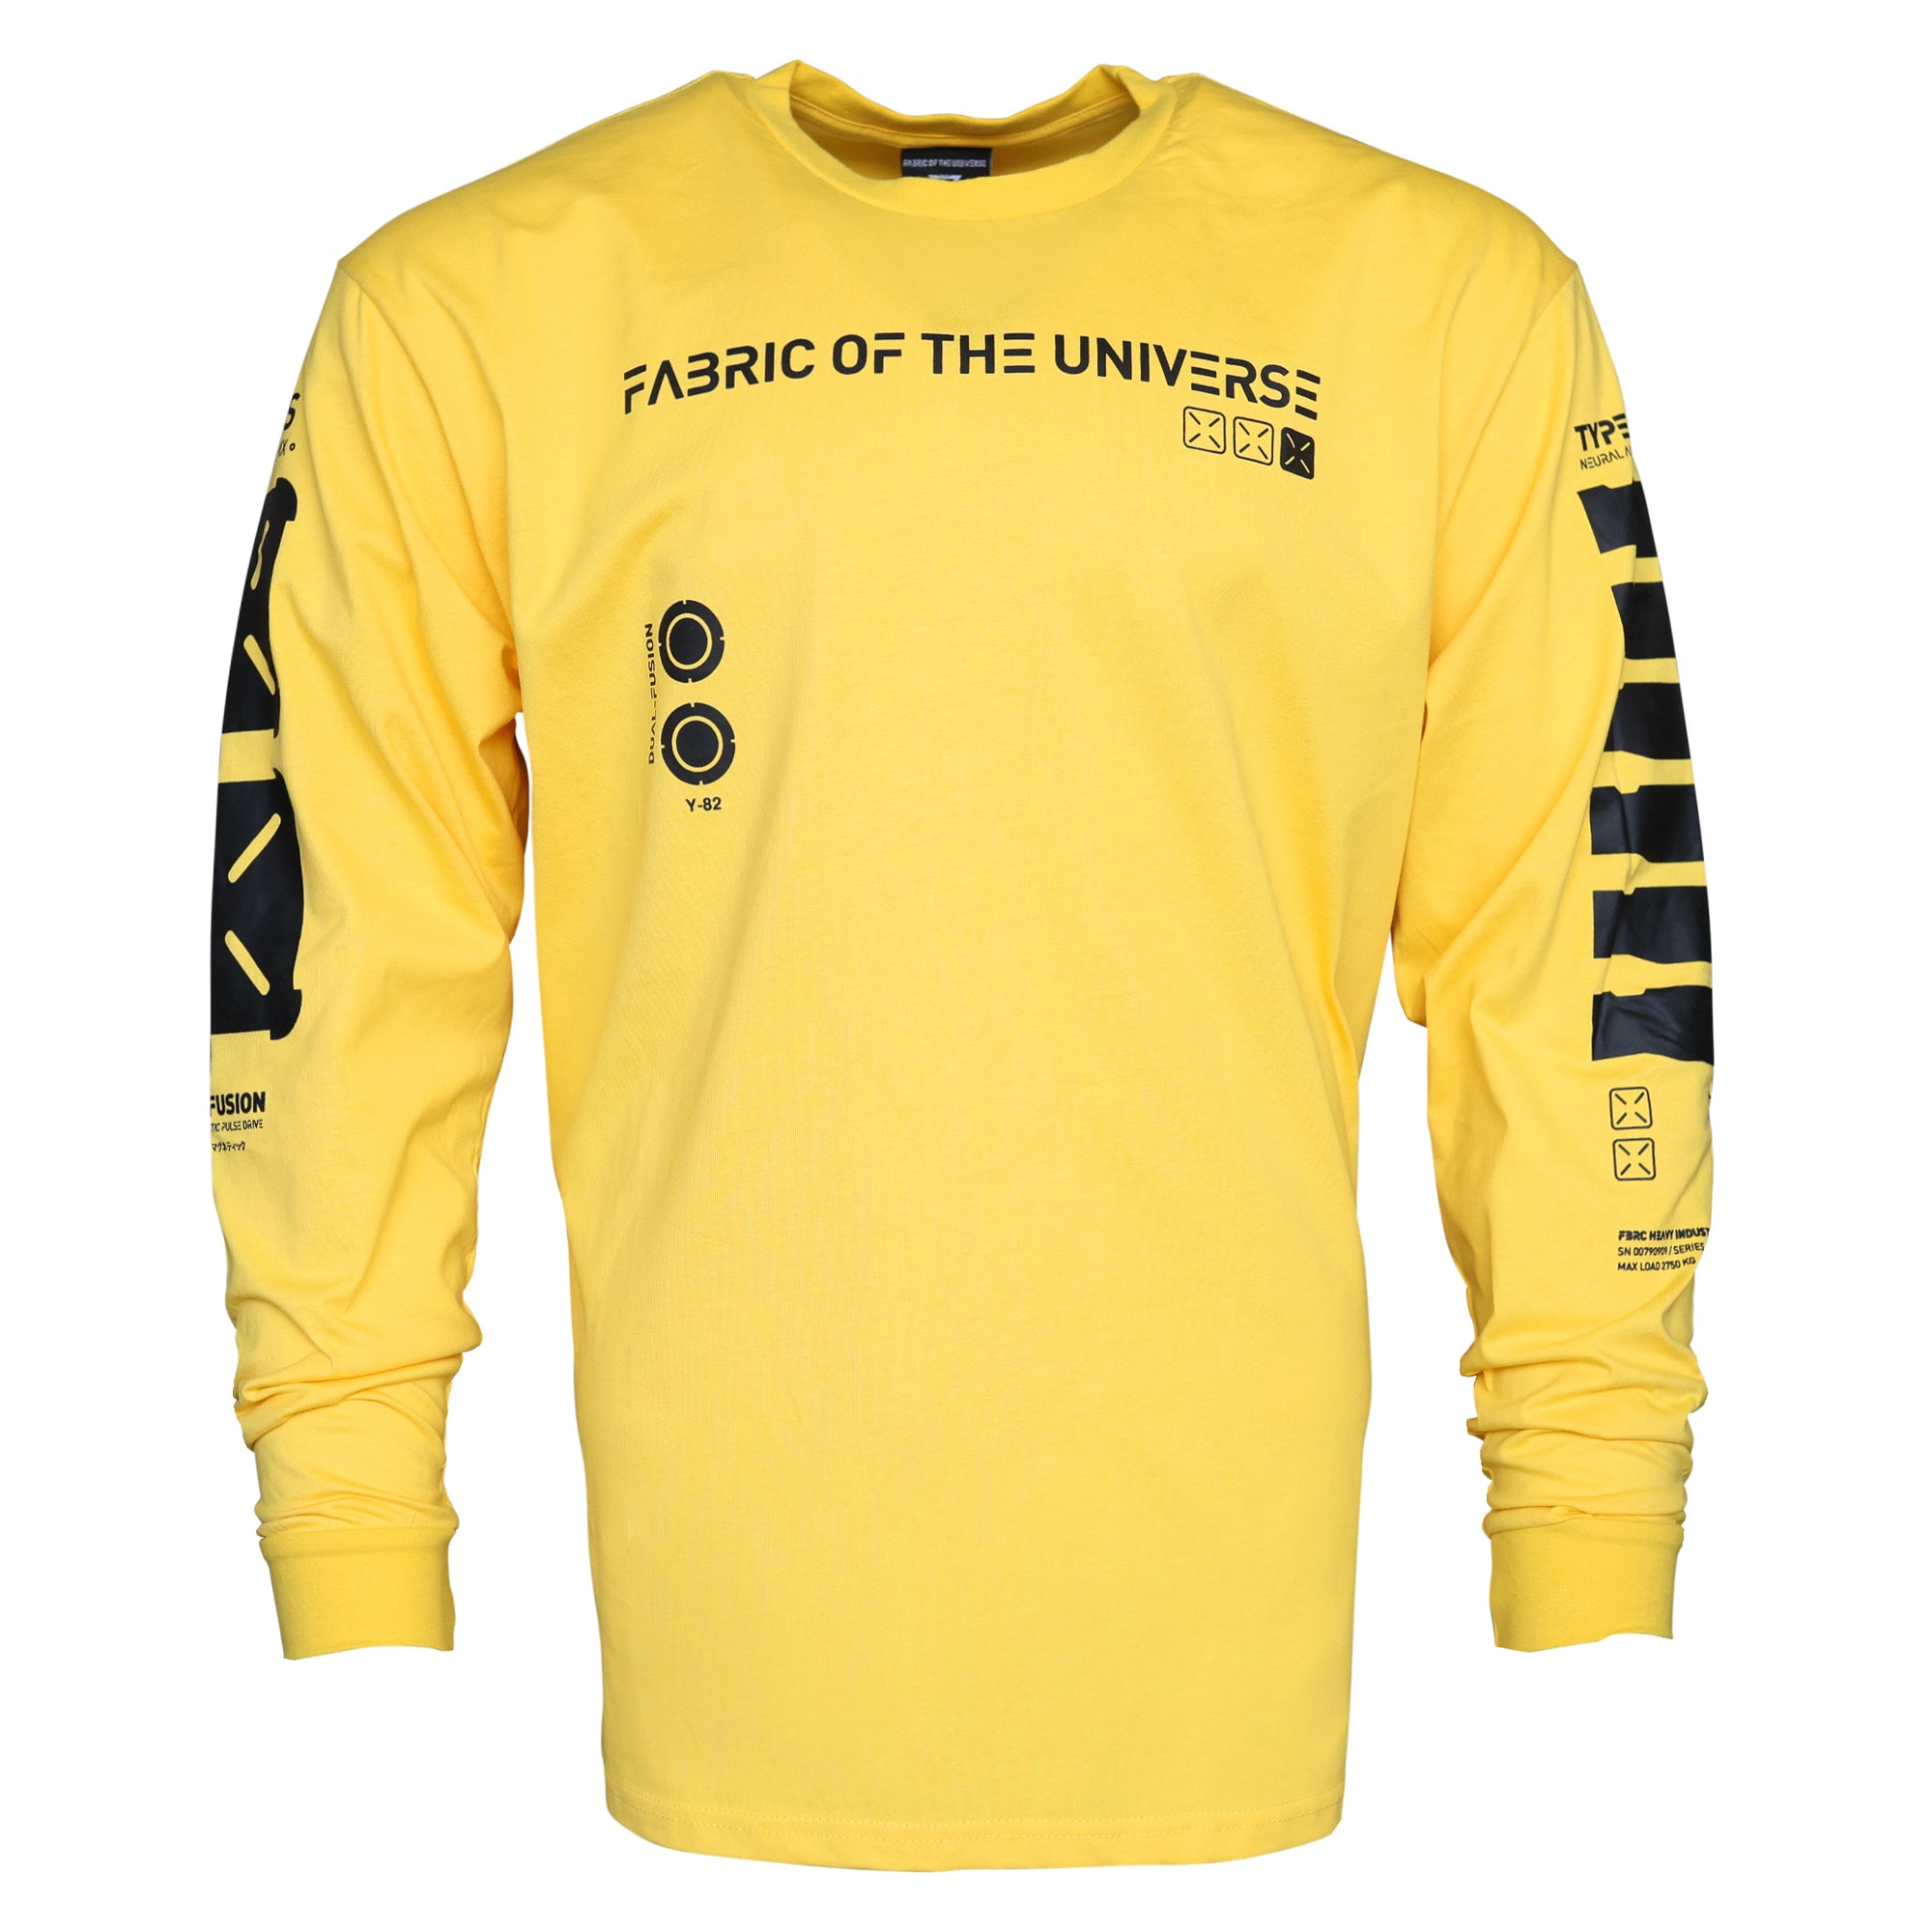 Y-2050 Yellow Long Sleeve T